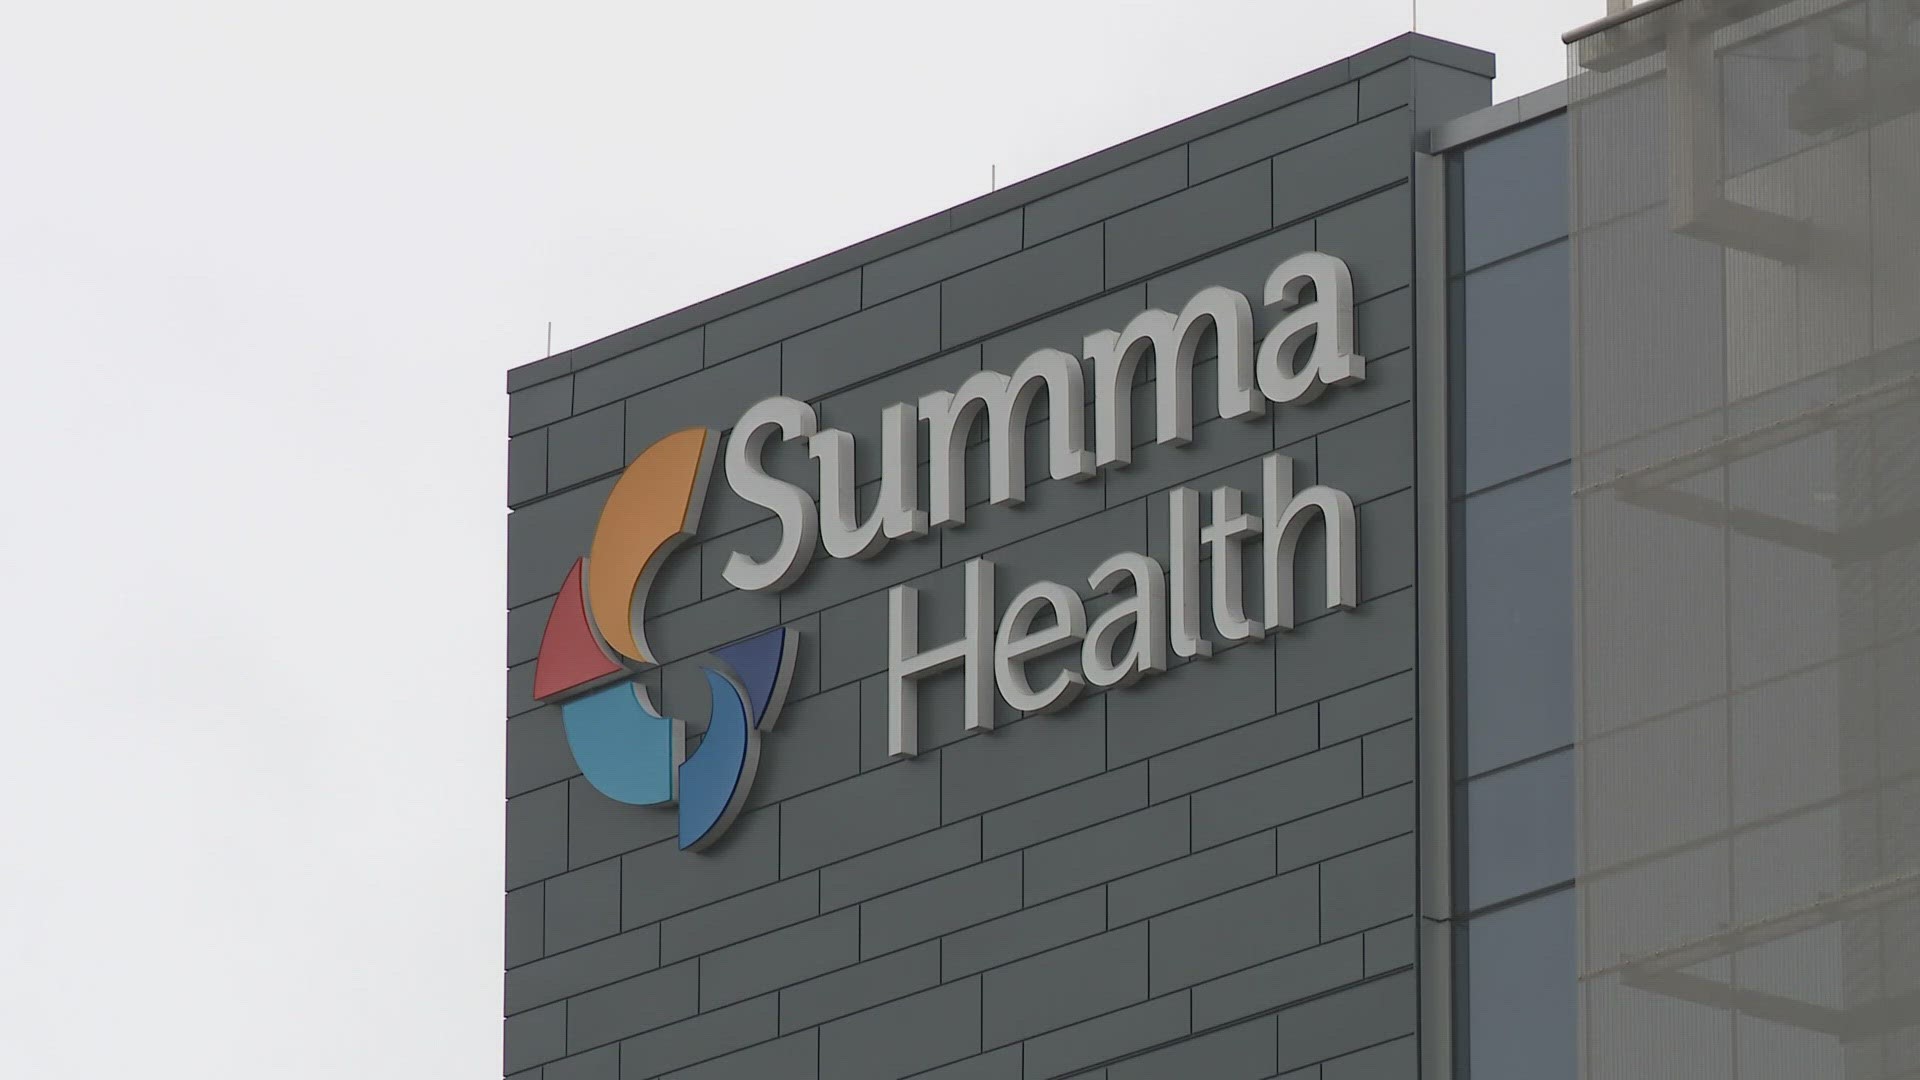 Summa Health says it will continue to operate under the same name and brand in Akron, while maintaining its commitment to charity care.